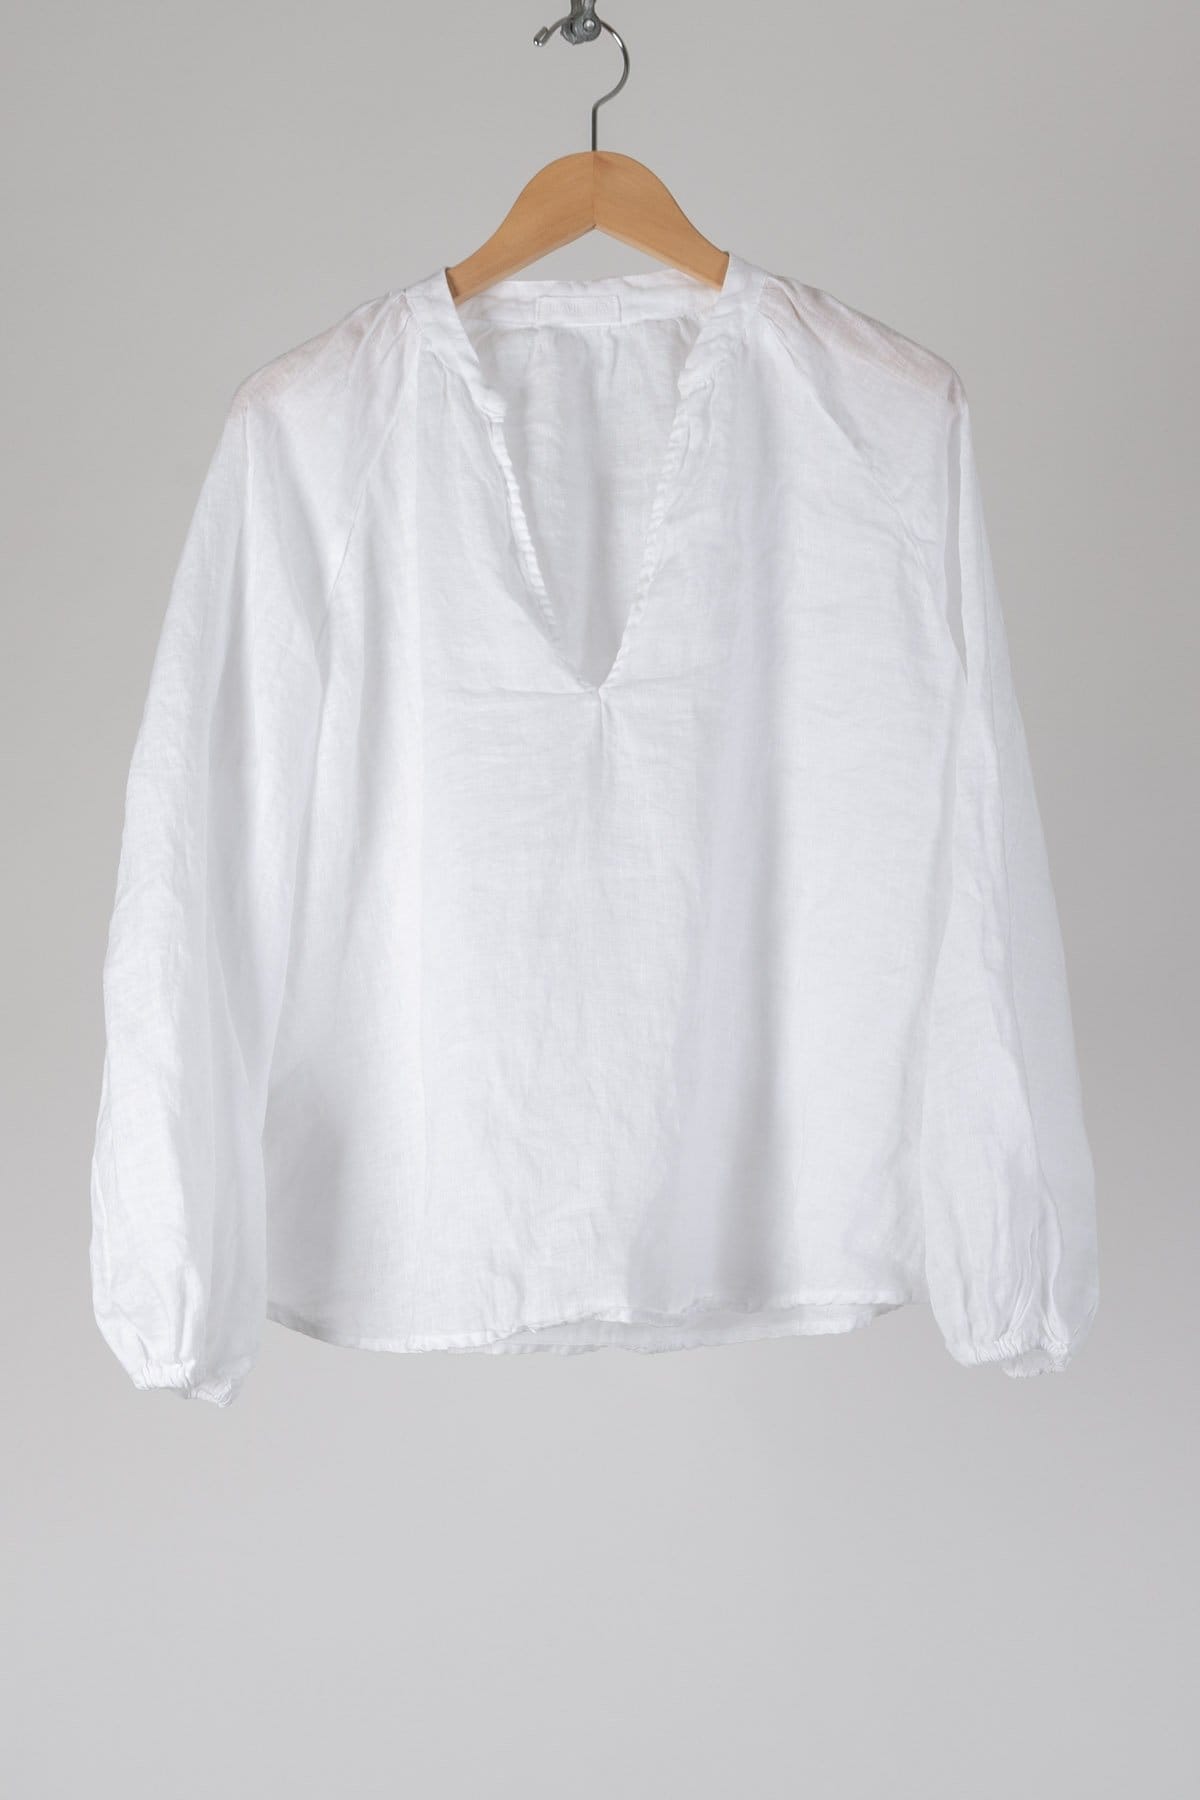 A v-neck blouse with a billowy cut and elastic at the wrists.